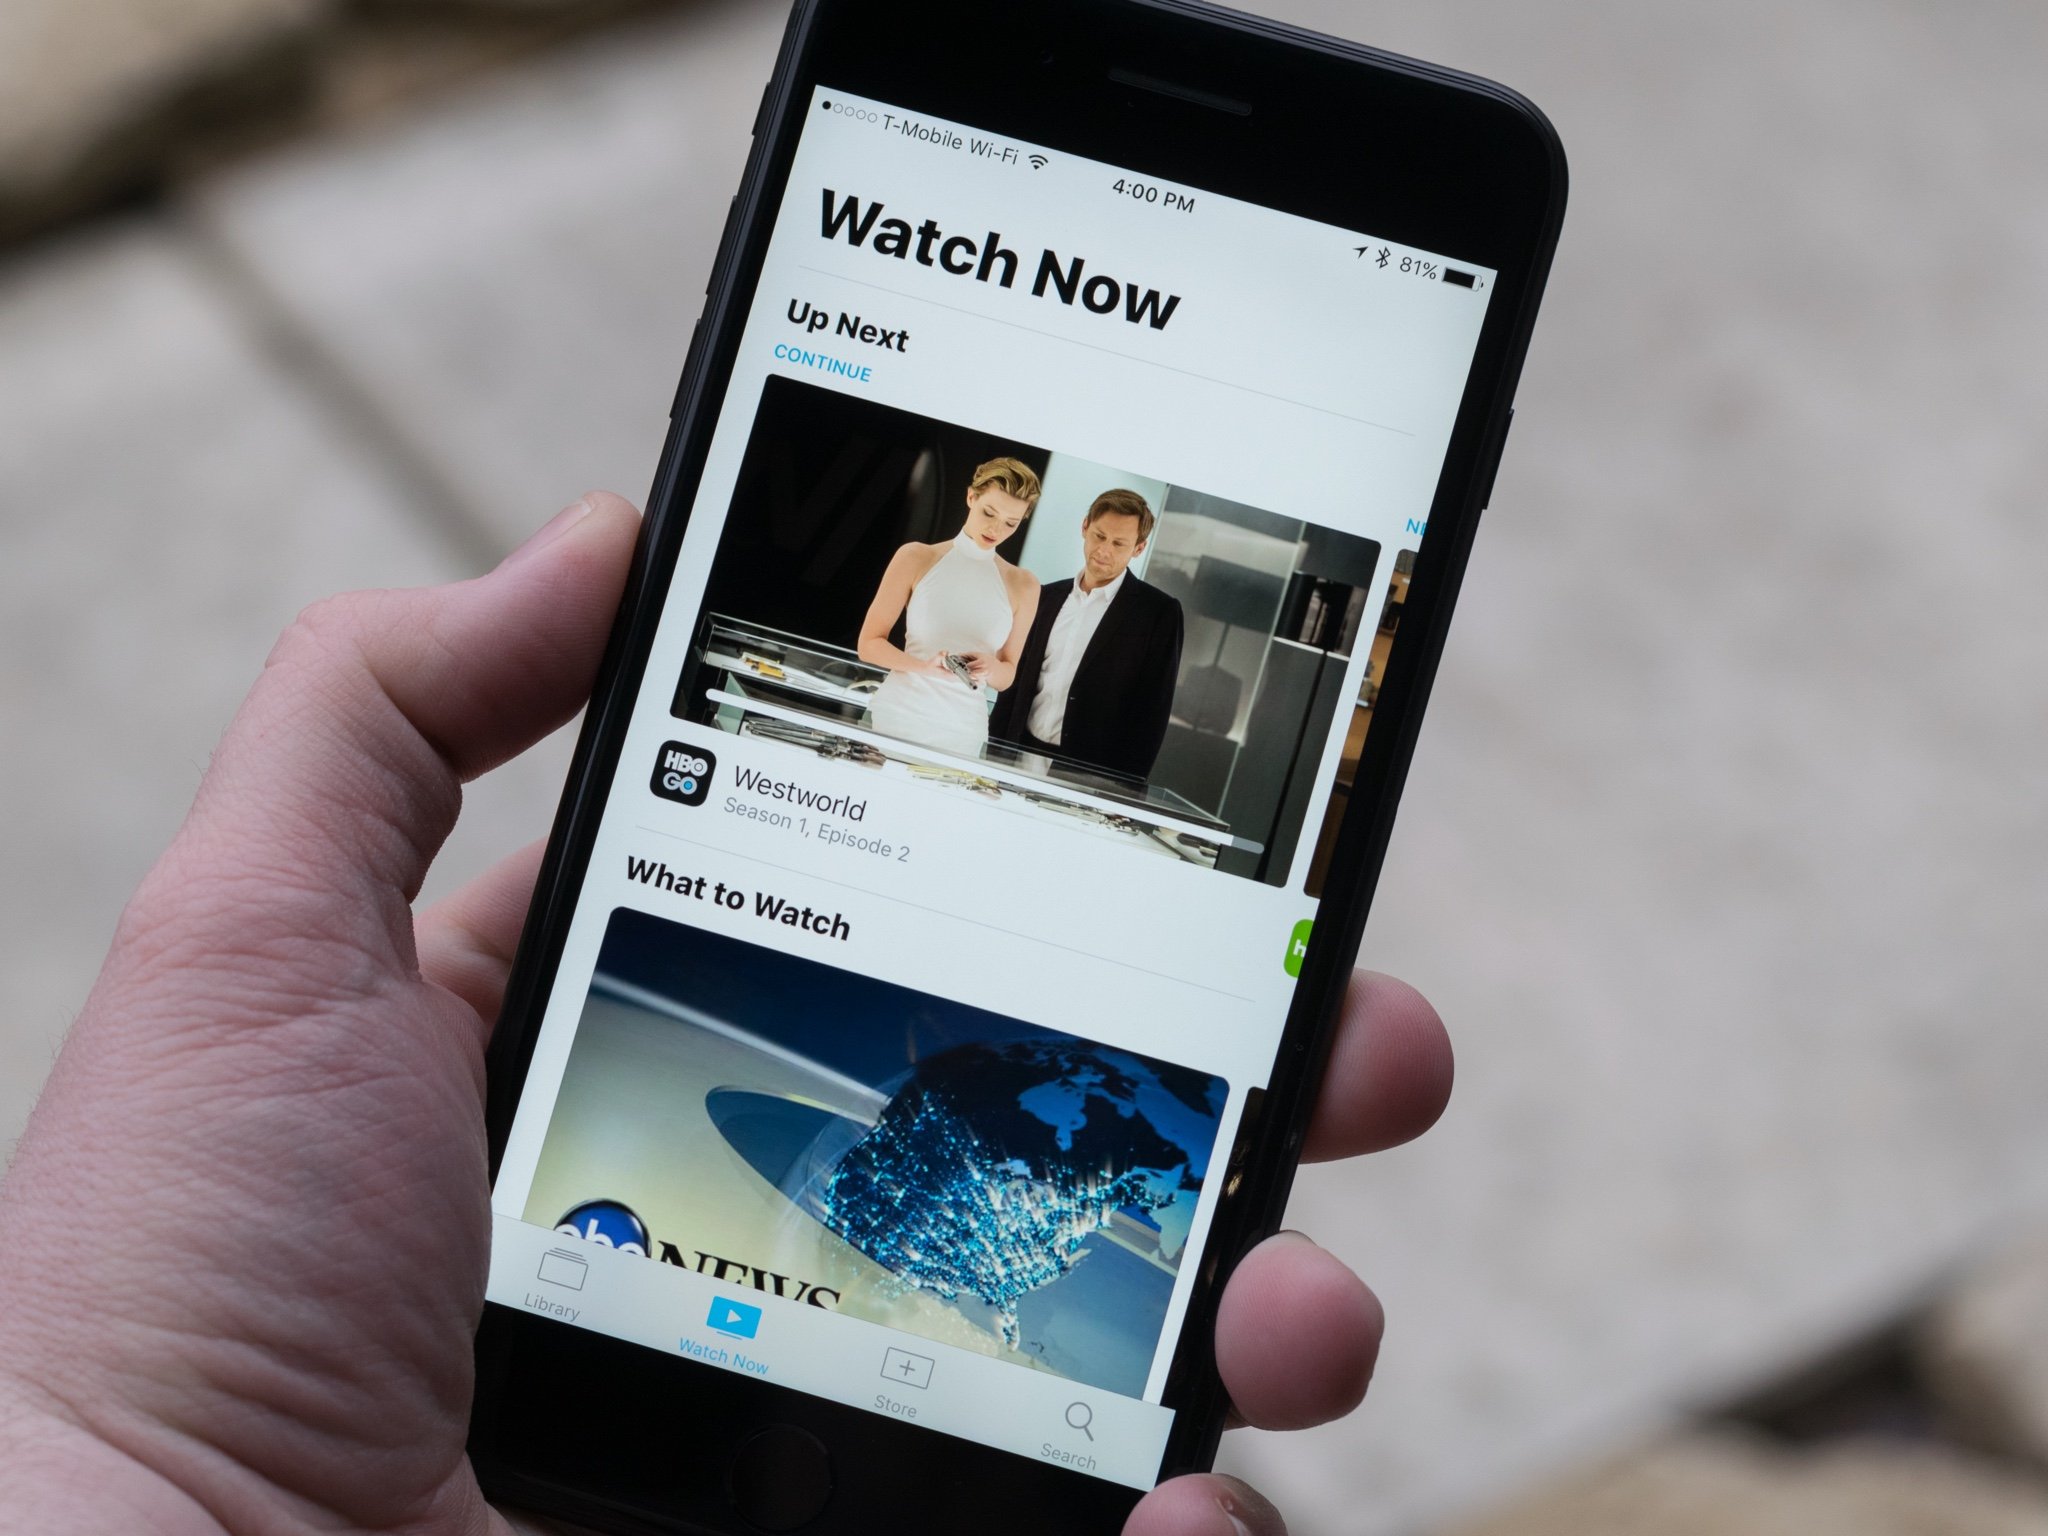 HBO Go adds support for TV app, Single Sign-On